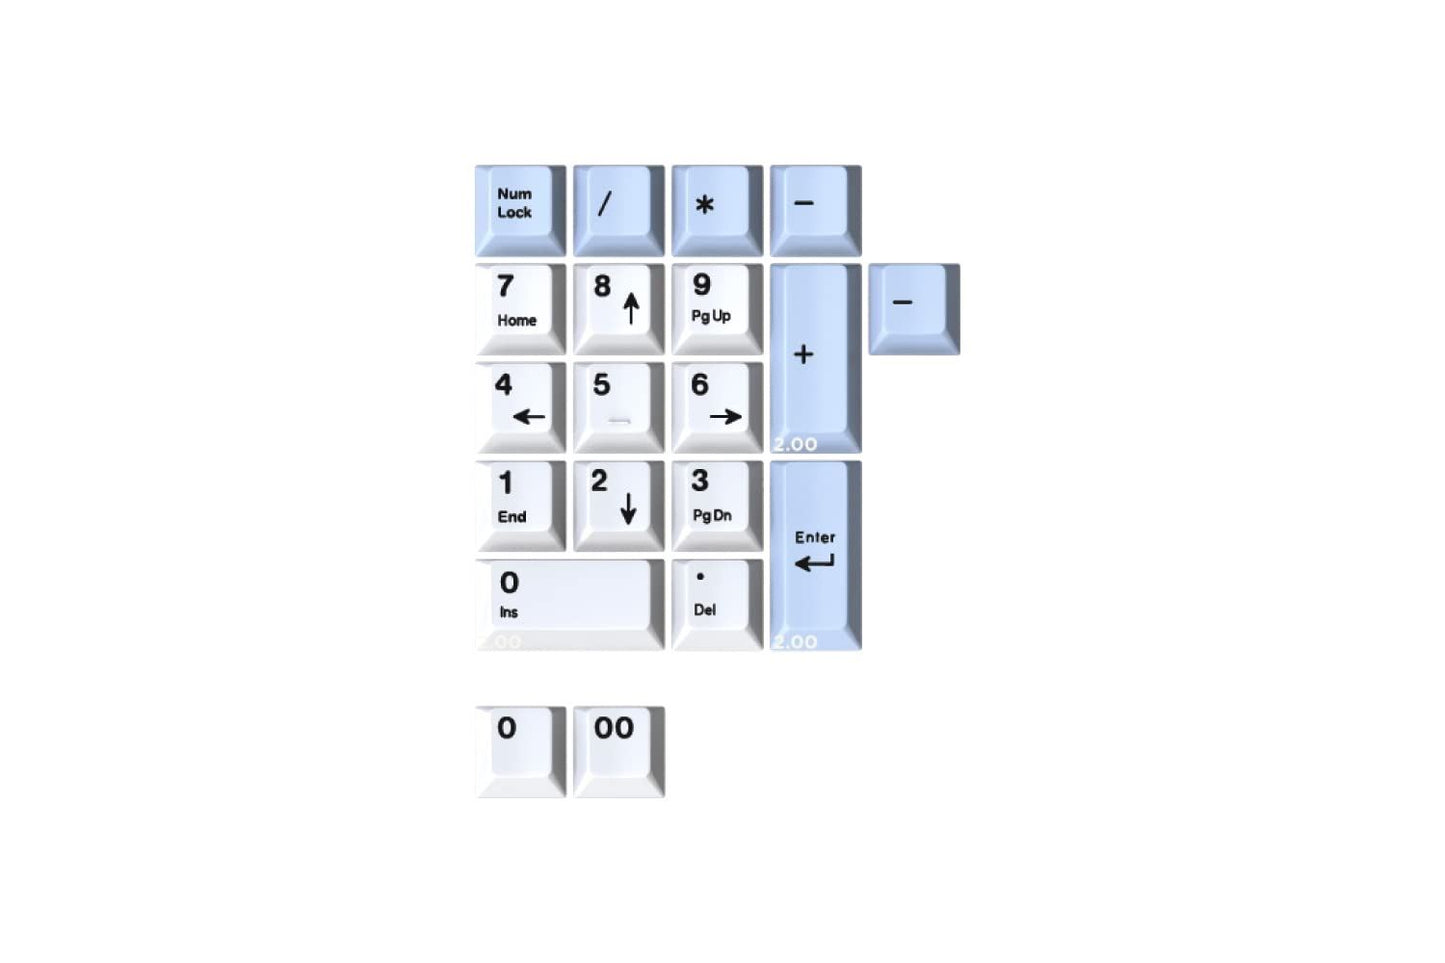 DROP MiTo DCP Pegaso Custom Keycap Set - Compatible with Cherry MX-Style switche